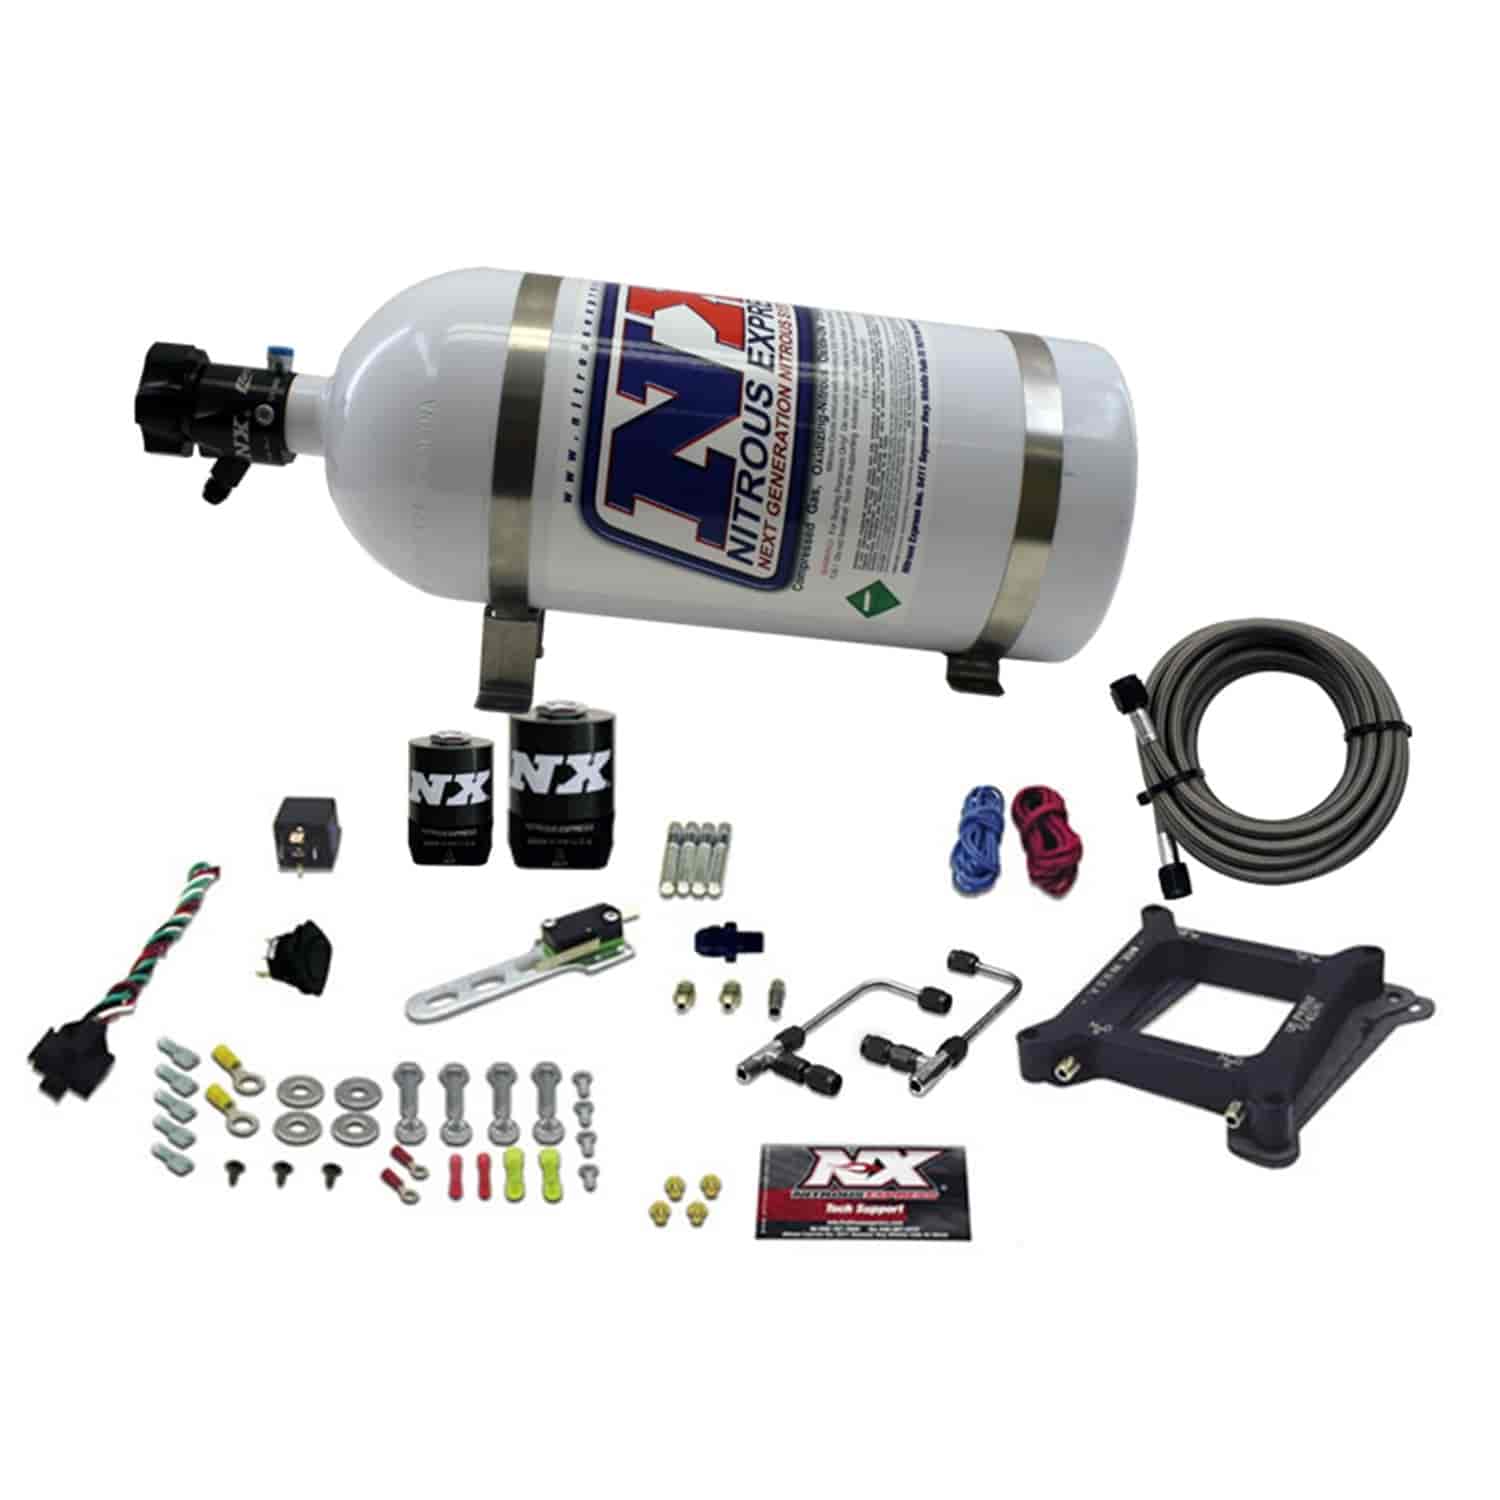 Gemini Restricted Nitrous Class Nitrous System 4150-series Carb Spray Plate